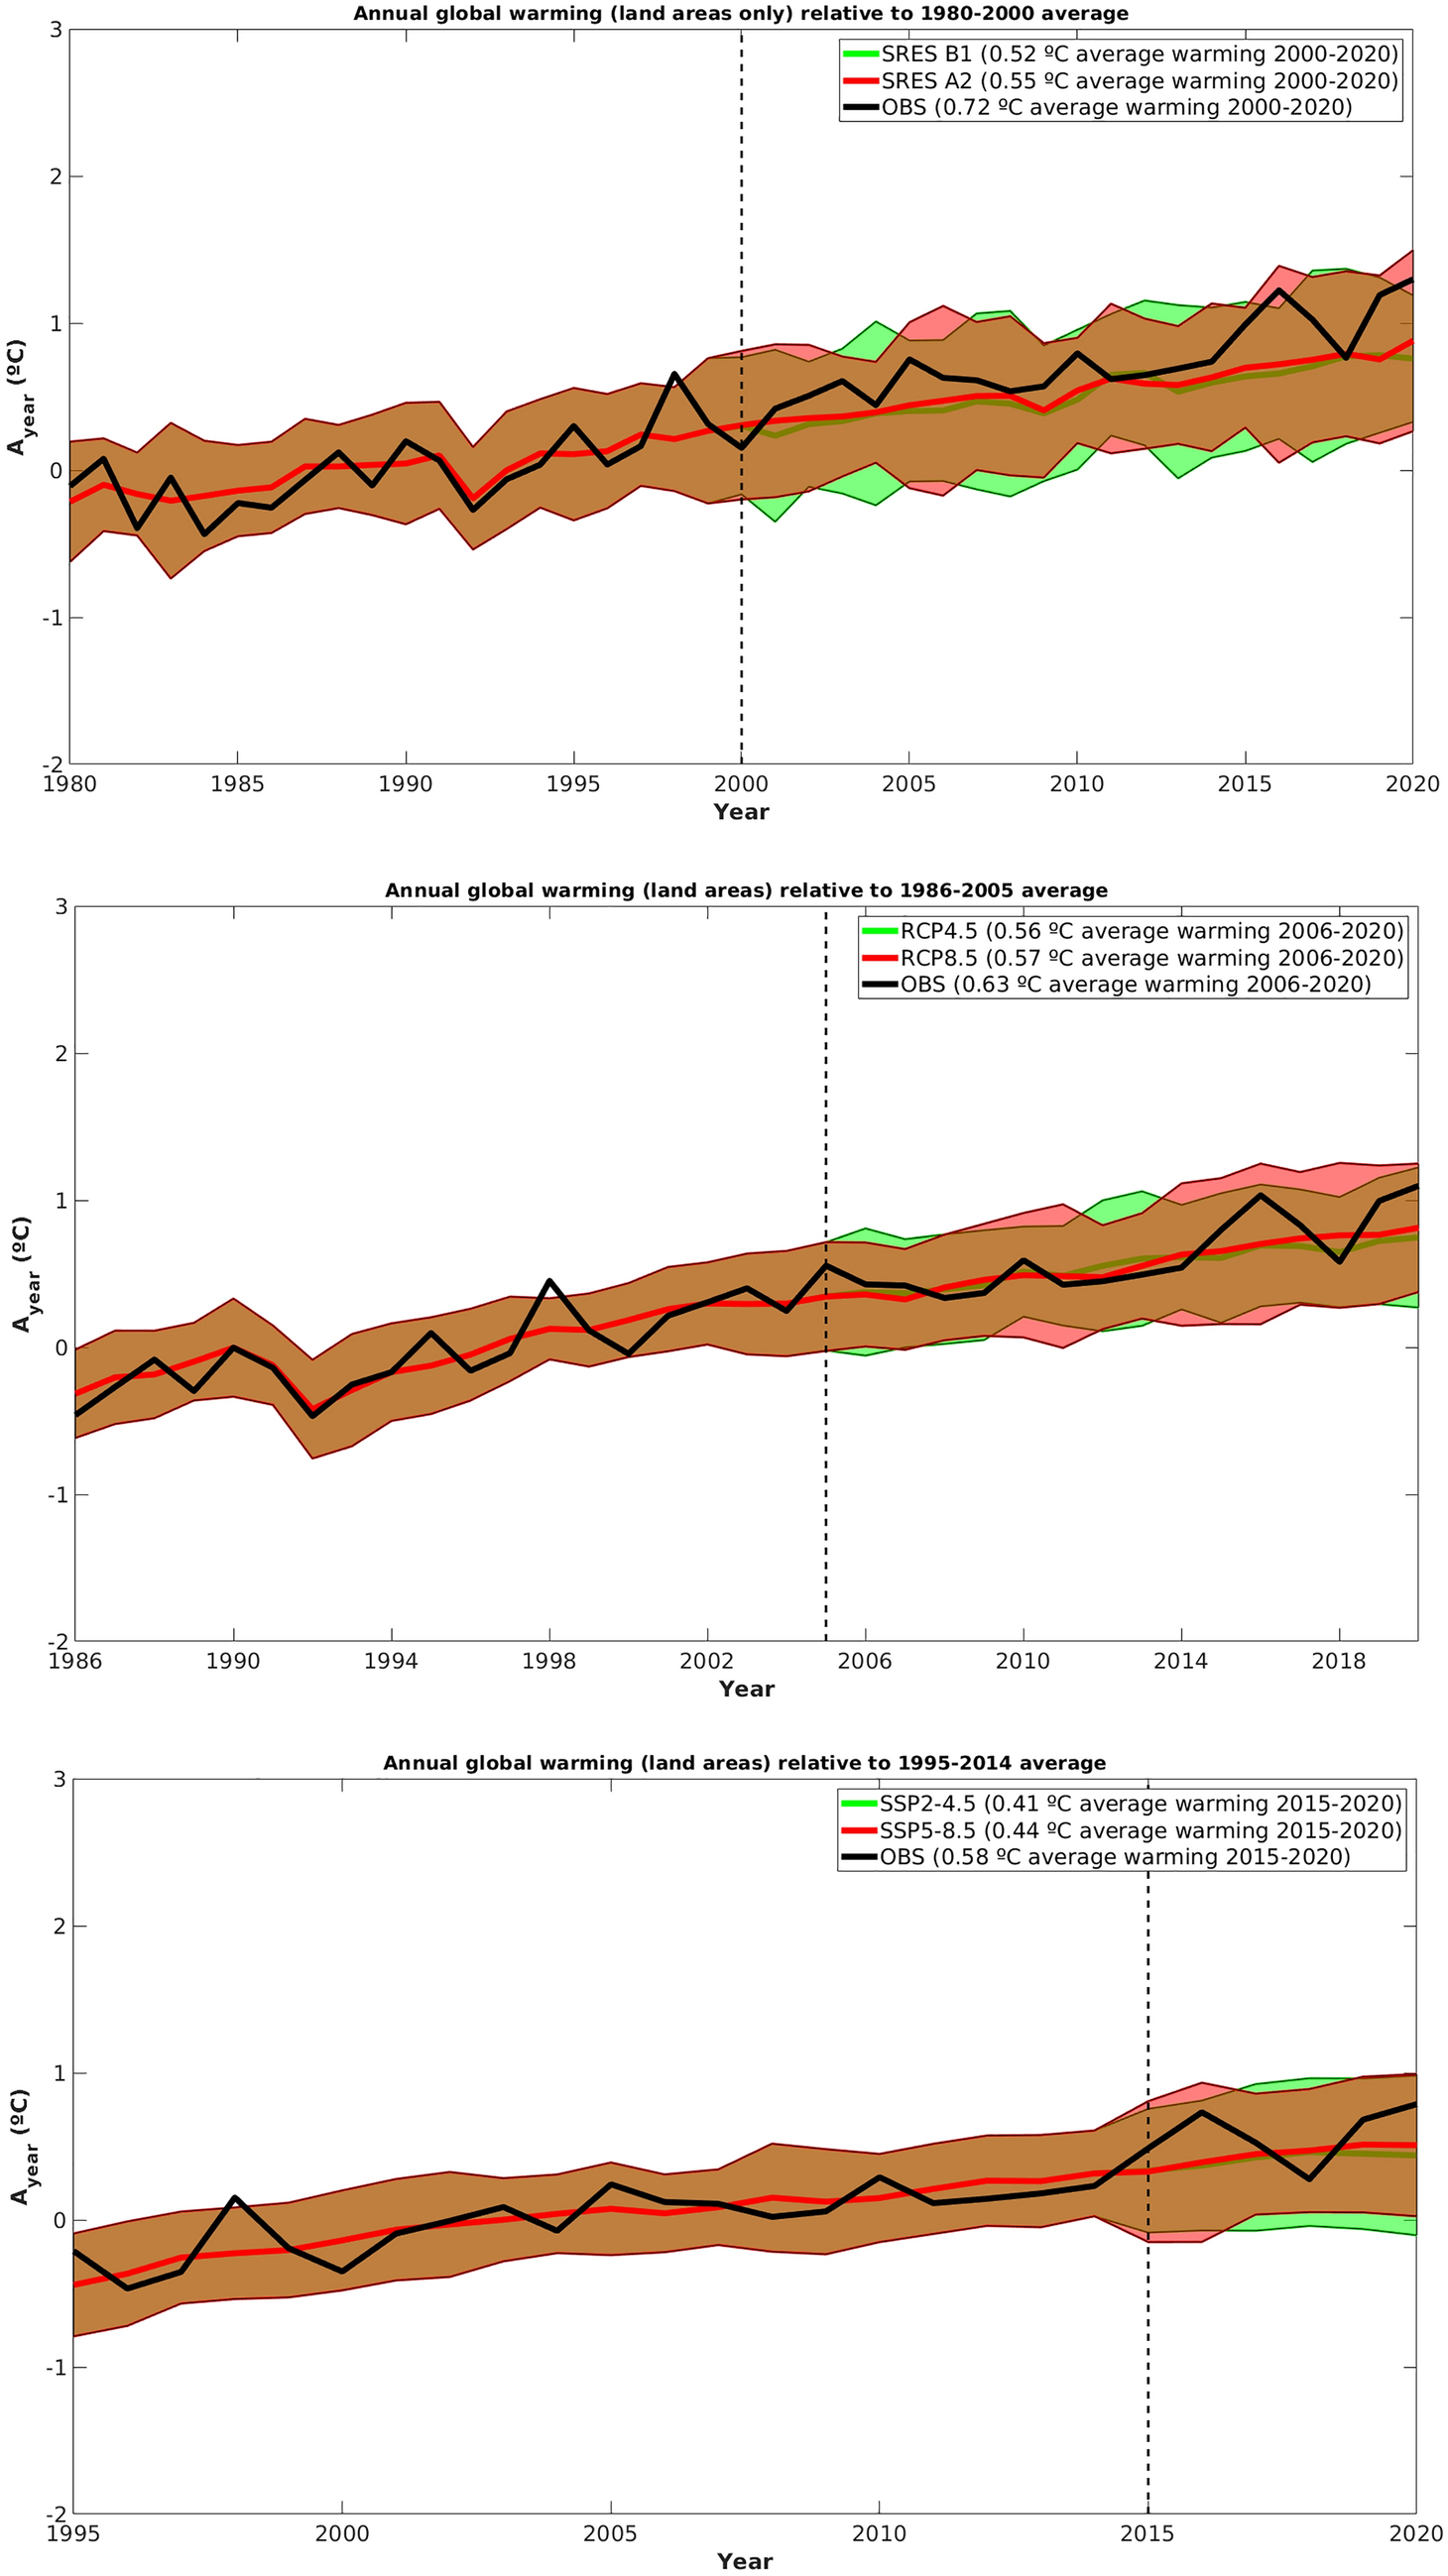 Climate modeling confirms historical records showing rise in